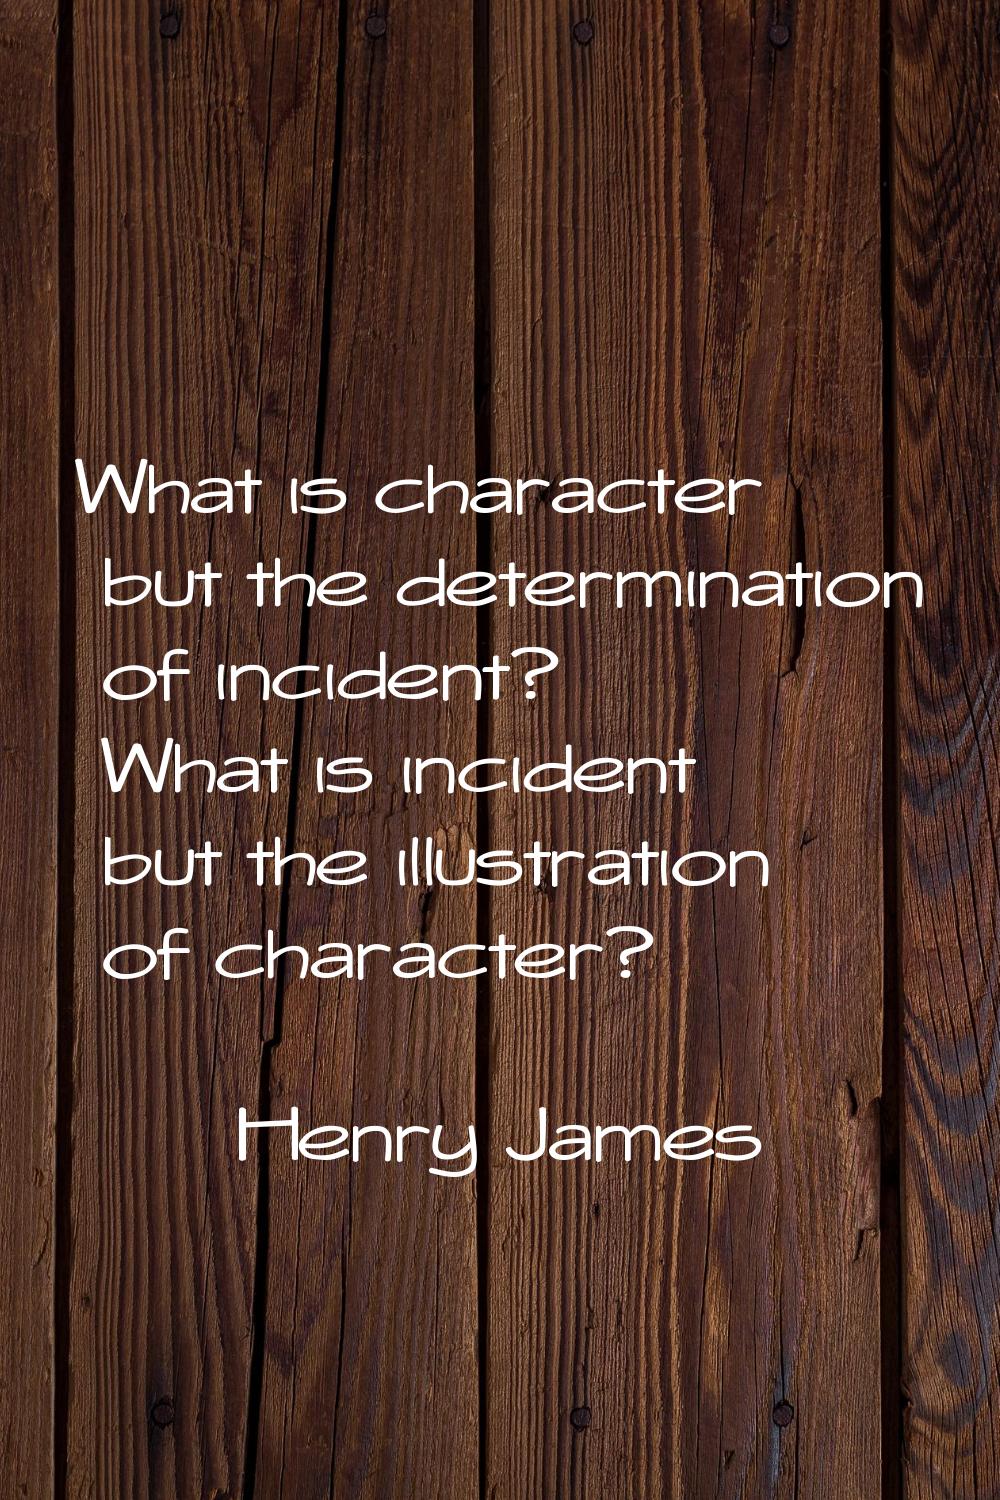 What is character but the determination of incident? What is incident but the illustration of chara